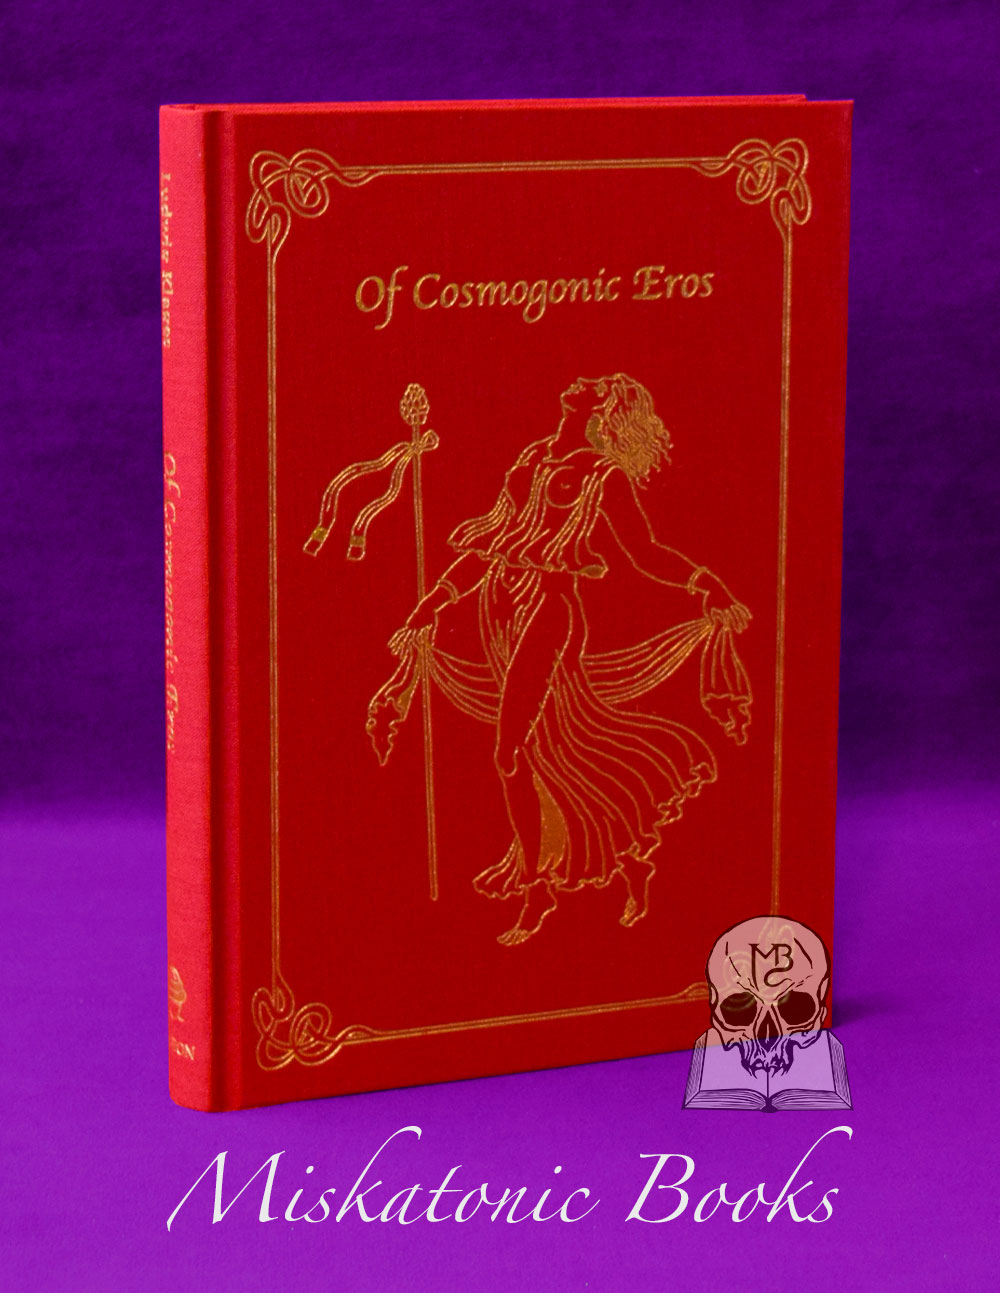 OF COSMOGONIC EROS by Ludwig Klages - 2nd Edition Limited Edition Hardcover